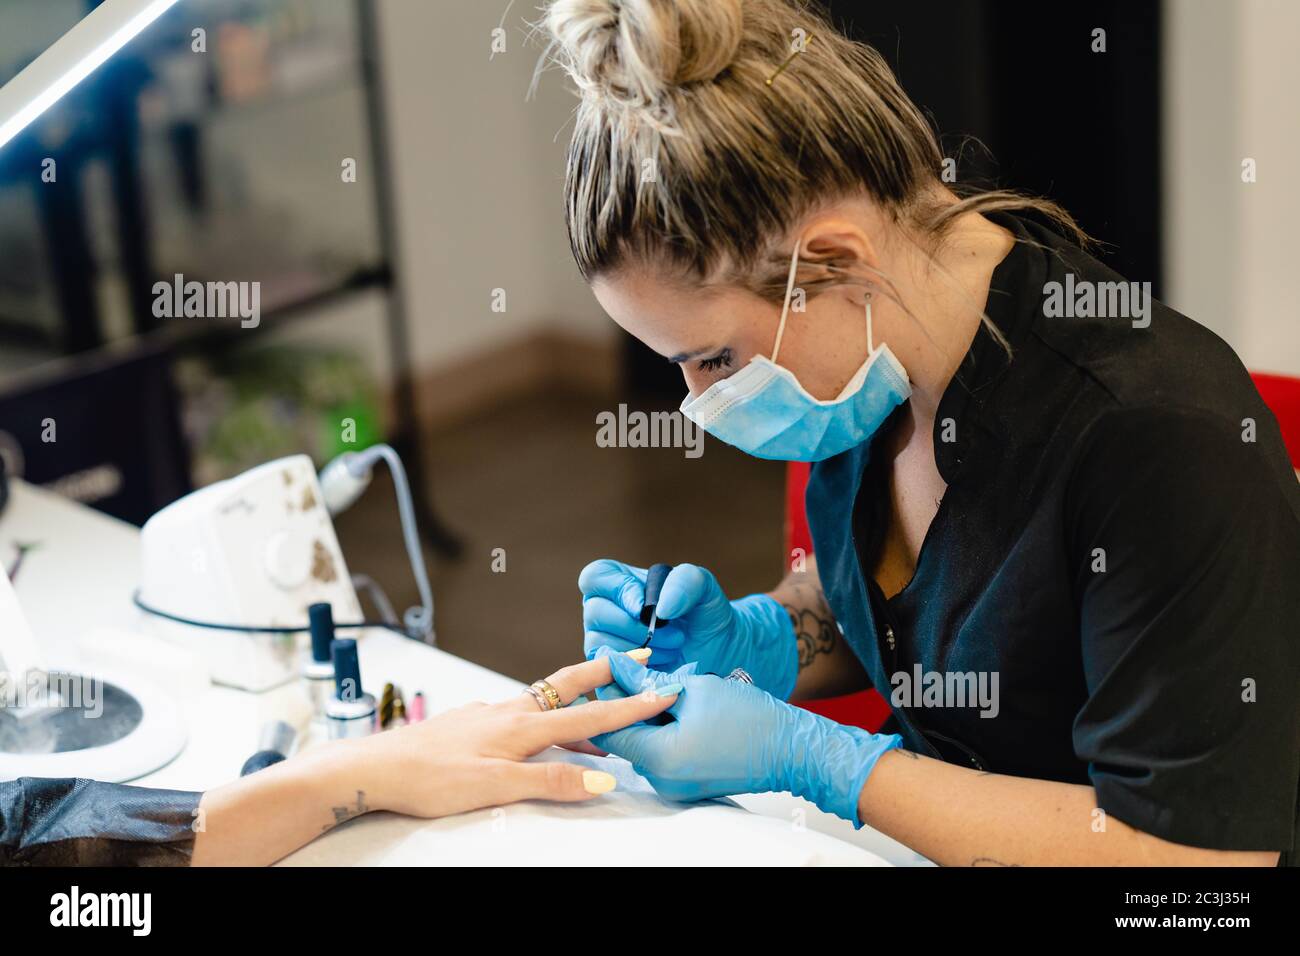 Close-up of Beautician painting her client's nails in blue and yellow nail varnish. Stock Photo